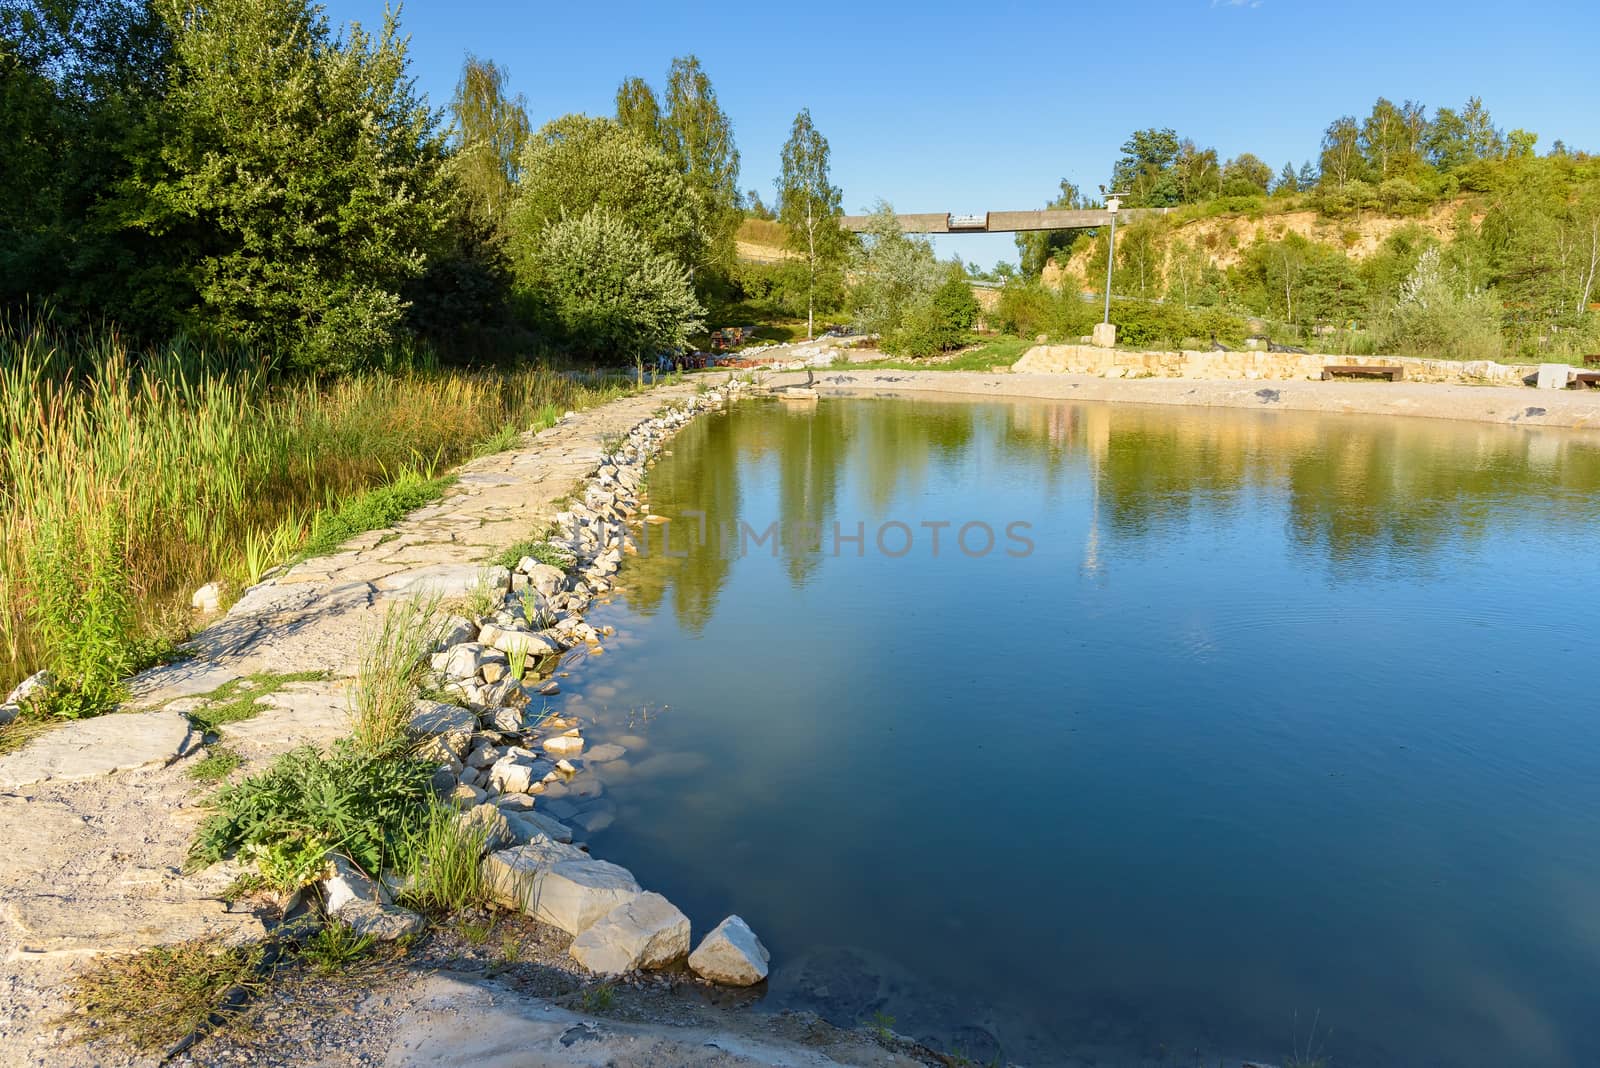 Pond in Geosfera park located in old quarry in Jaworzno, Poland